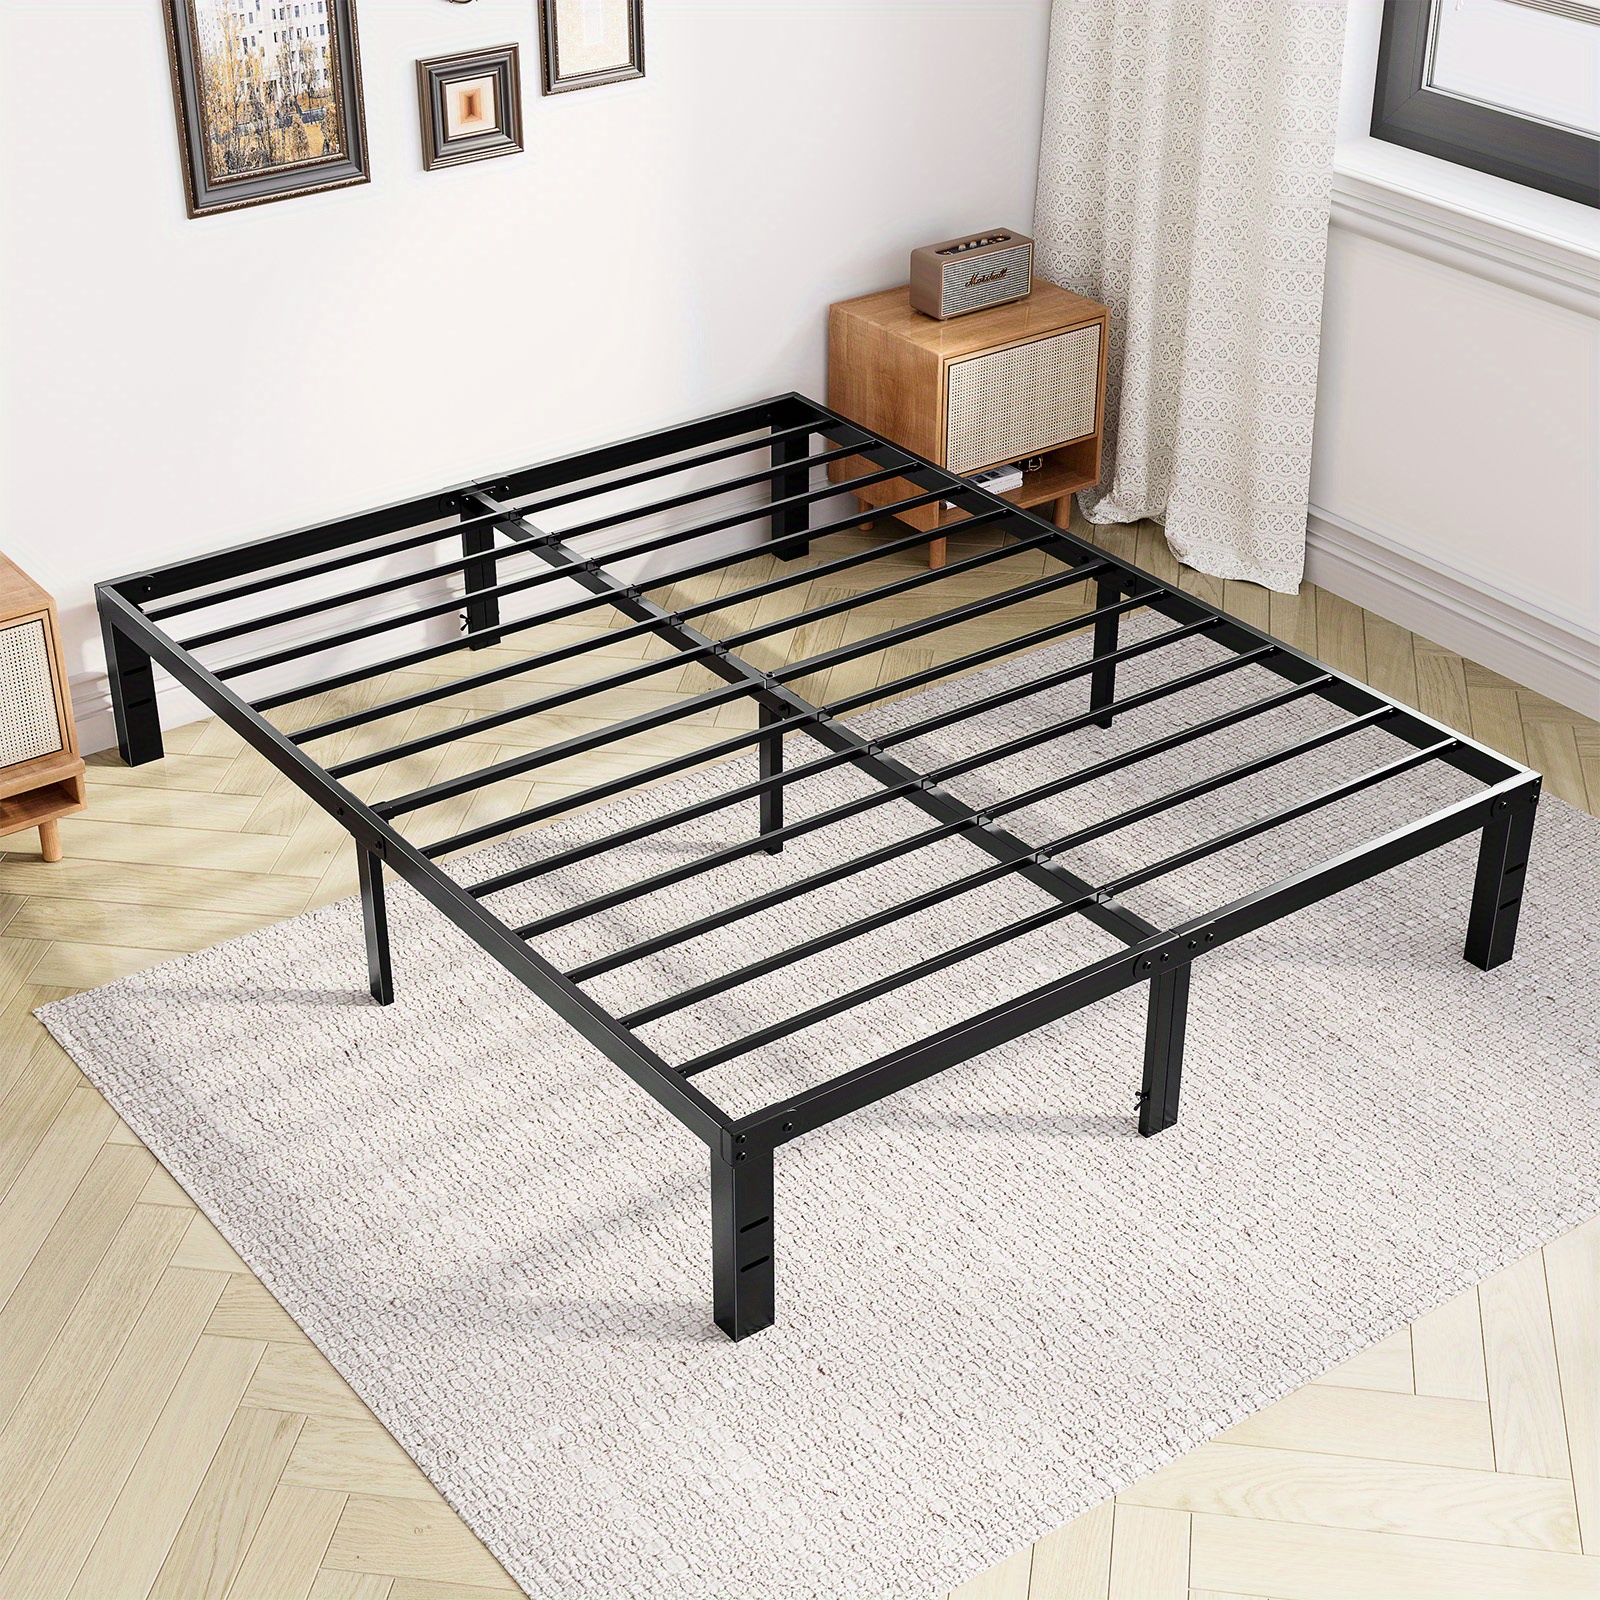 

Metal Sturdy Bed Frame - Easy Assembly Twin Size Platform Bed Frame Mattress Foundation With Steel Slat Support, No Box Spring Needed, Storage Space Under Frame, Black